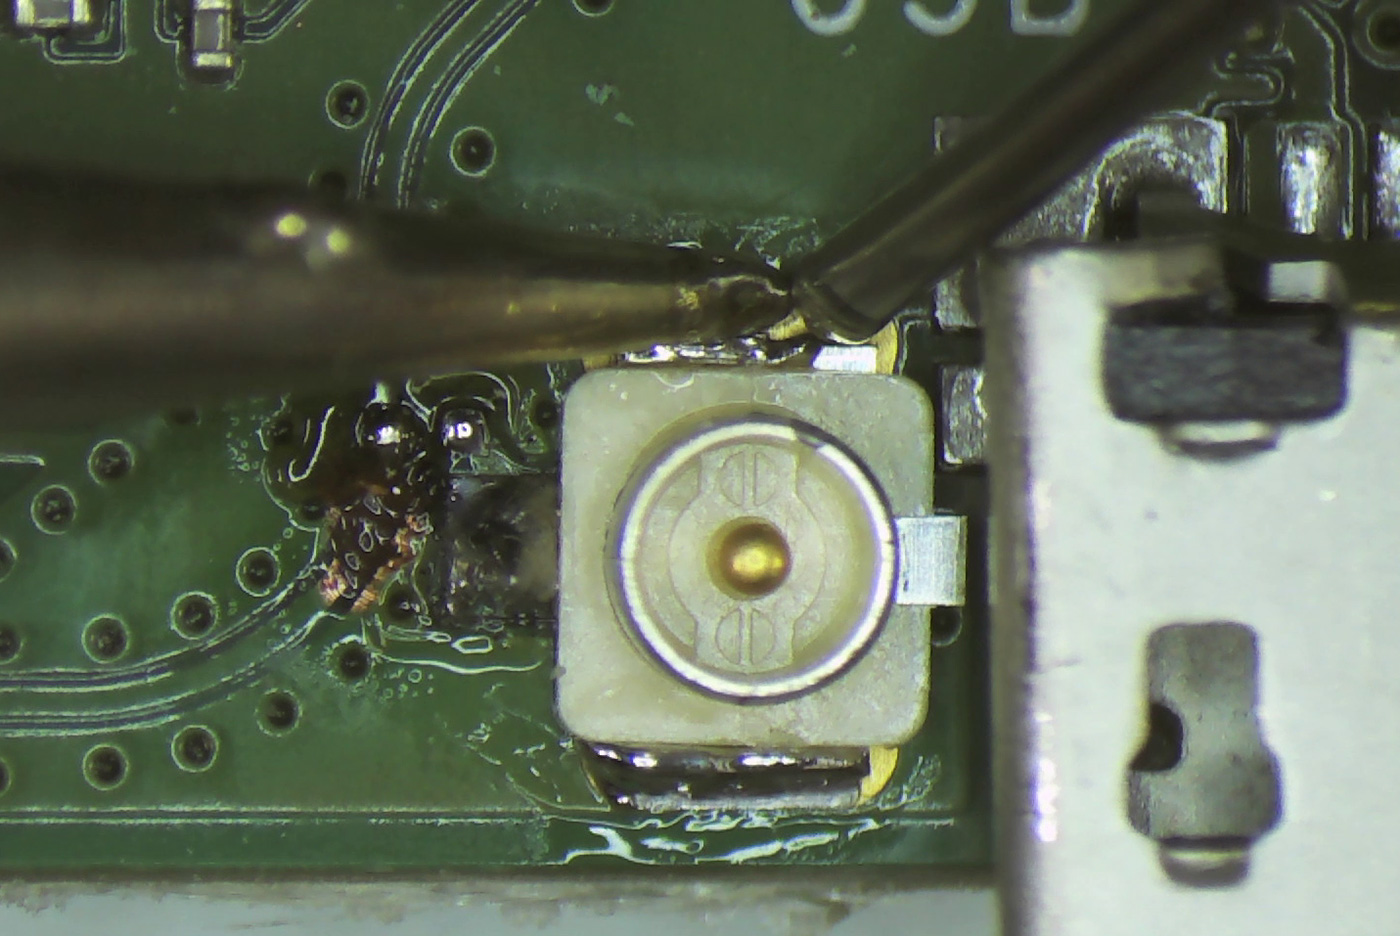 Soldering the connector